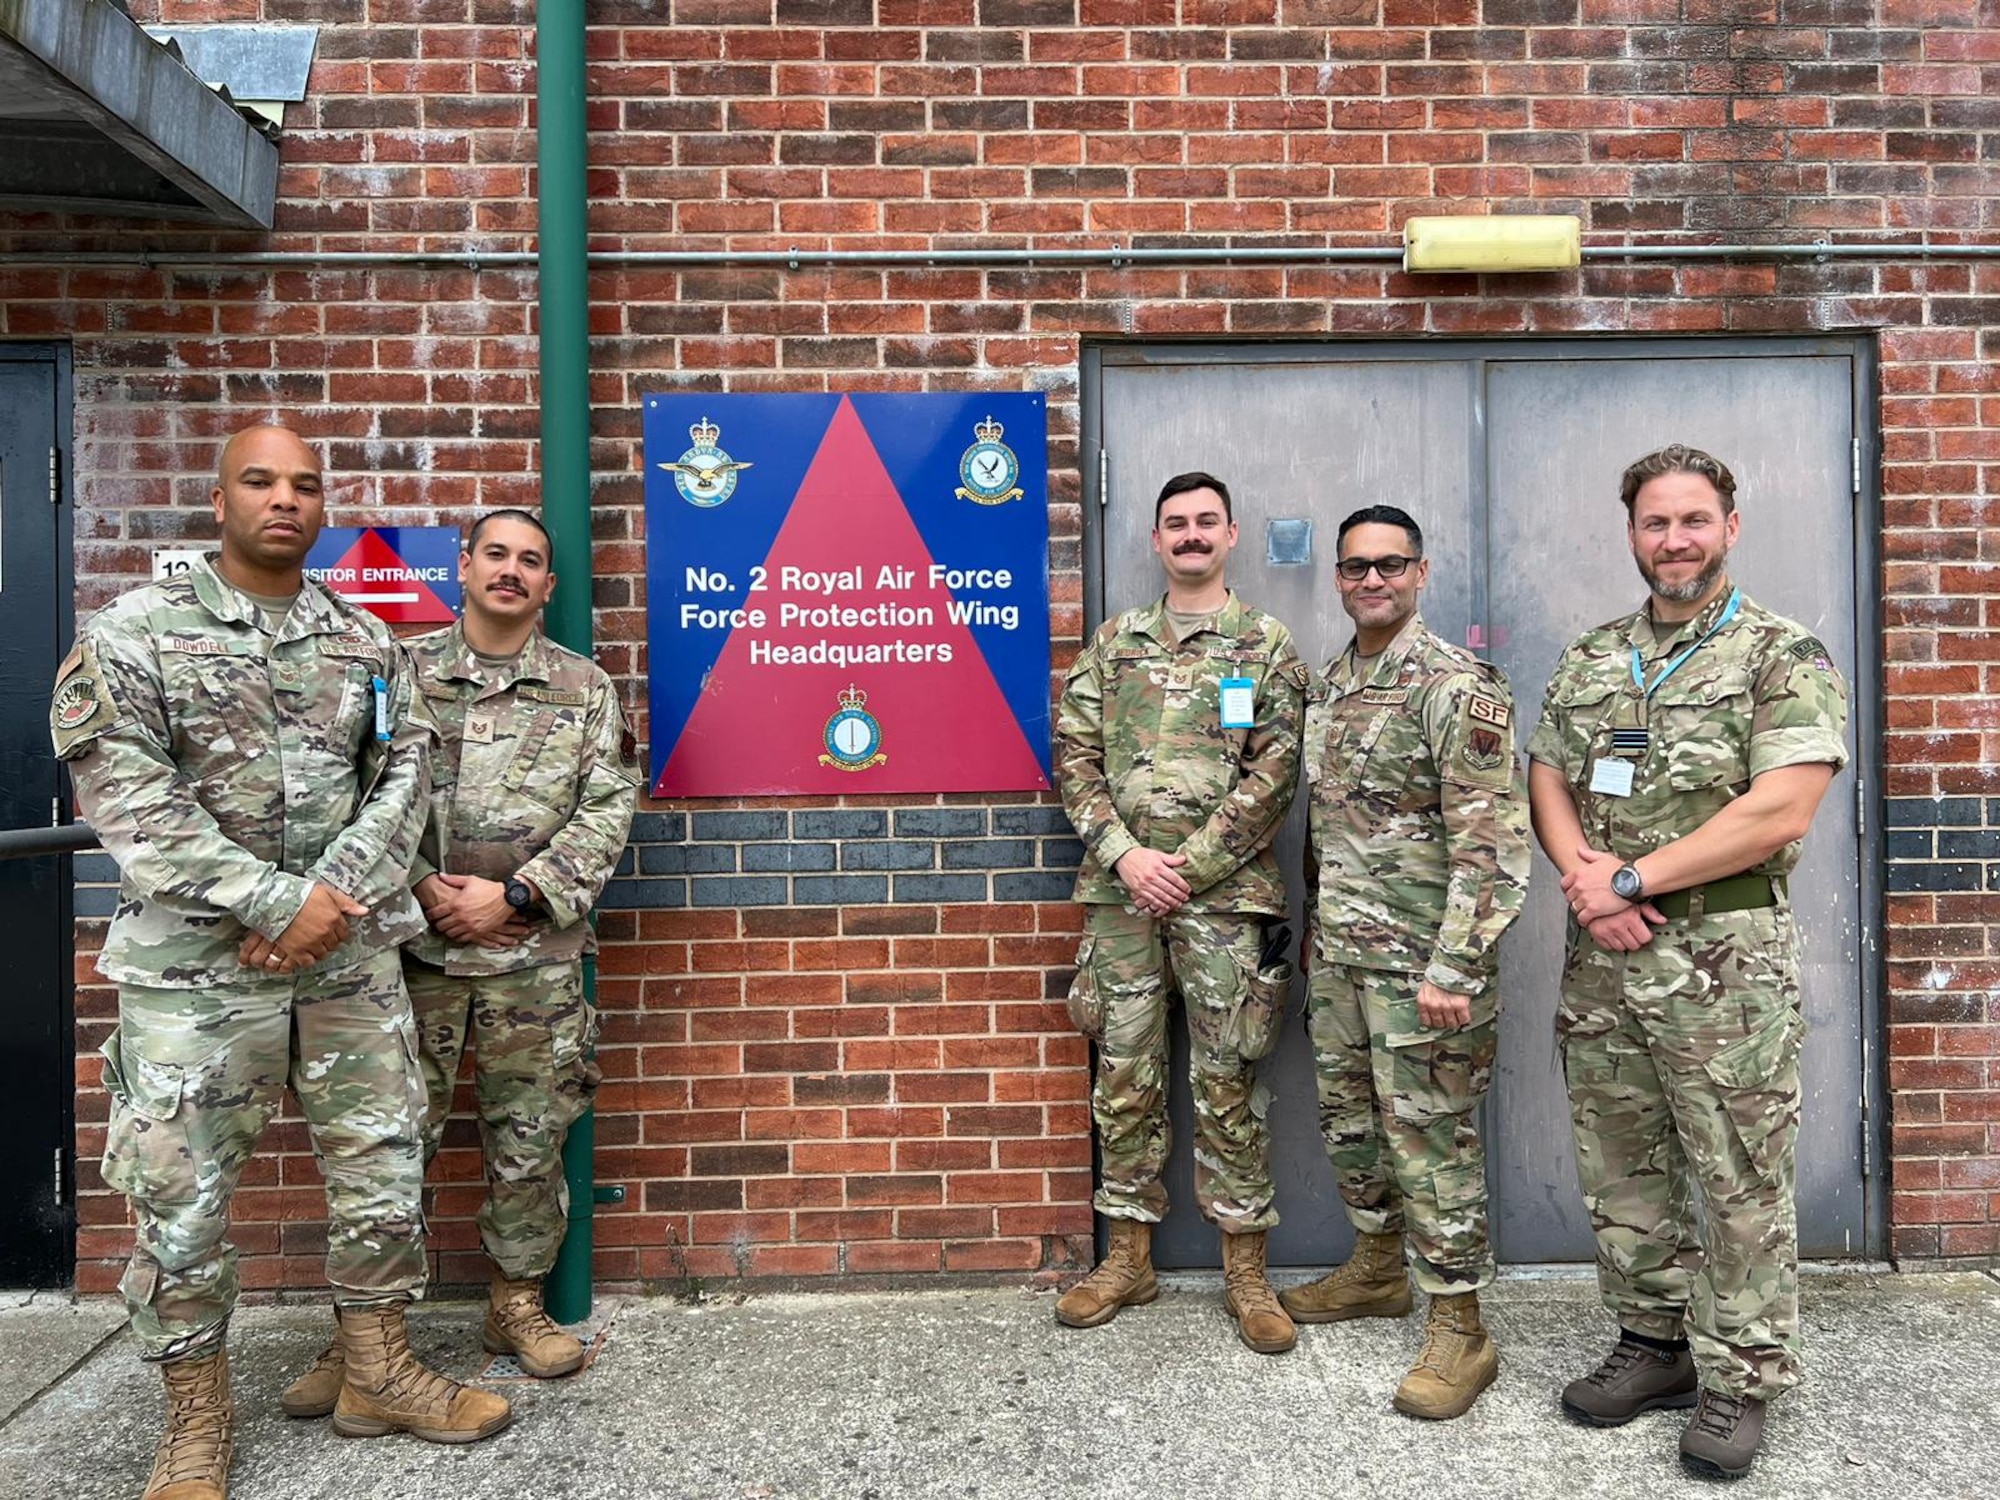 Four U.S. Air Force Airmen assigned to the 125th Security Forces Squadron along with host, Flight Lt. David Haslewood, 609 (West Riding) Squadron, RAF Regiment, are pictured before the No. 2 RAF Force Protection Wing headquarters building, Sept. 11, 2023. The Airmen are participating in the Military Reserve Exchange Program (MREP), a DoD initiative that allows for Reserve and Guard forces to partner with associated units to exchange knowledge, share tactics and procedures, and understand the training, doctrine and operations of NATO alliance partners. (U.S. Air National Guard photos by Tech Sgt. Chelsea Smith)